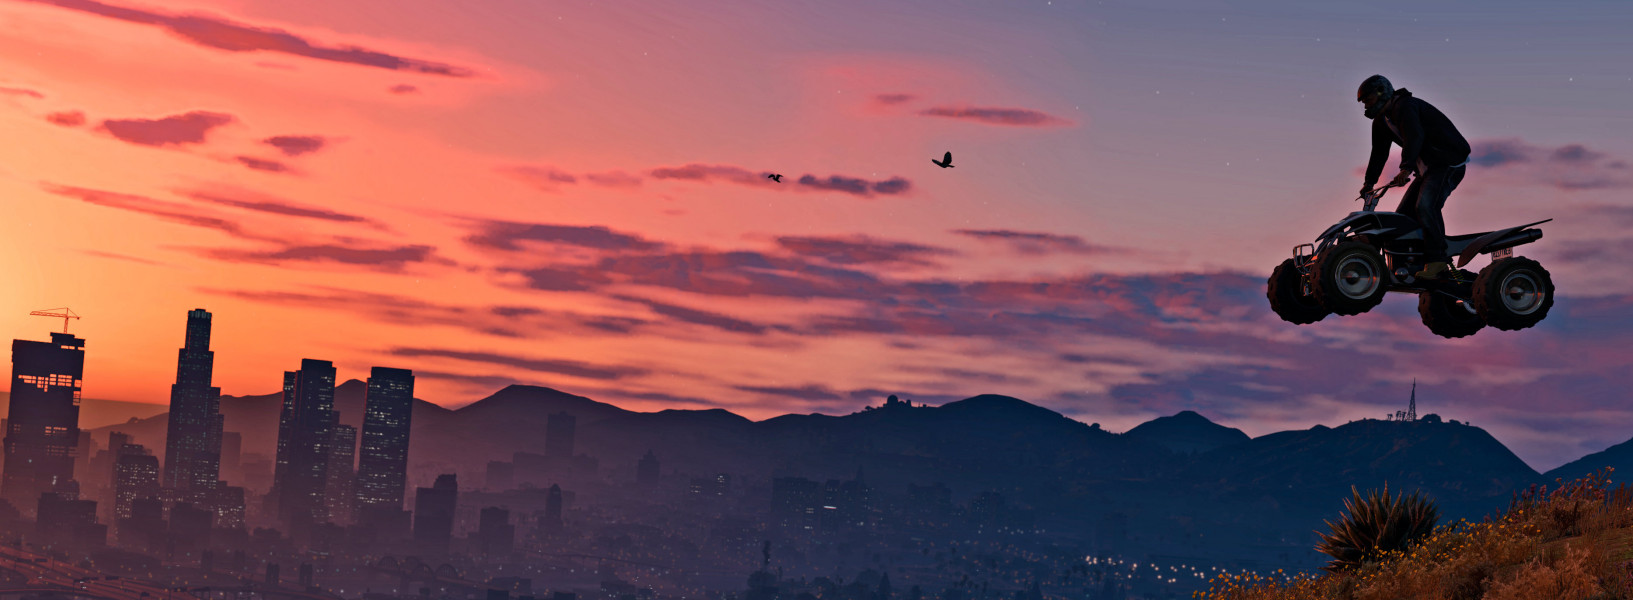 The inglorious nihilism of Grand Theft Auto V